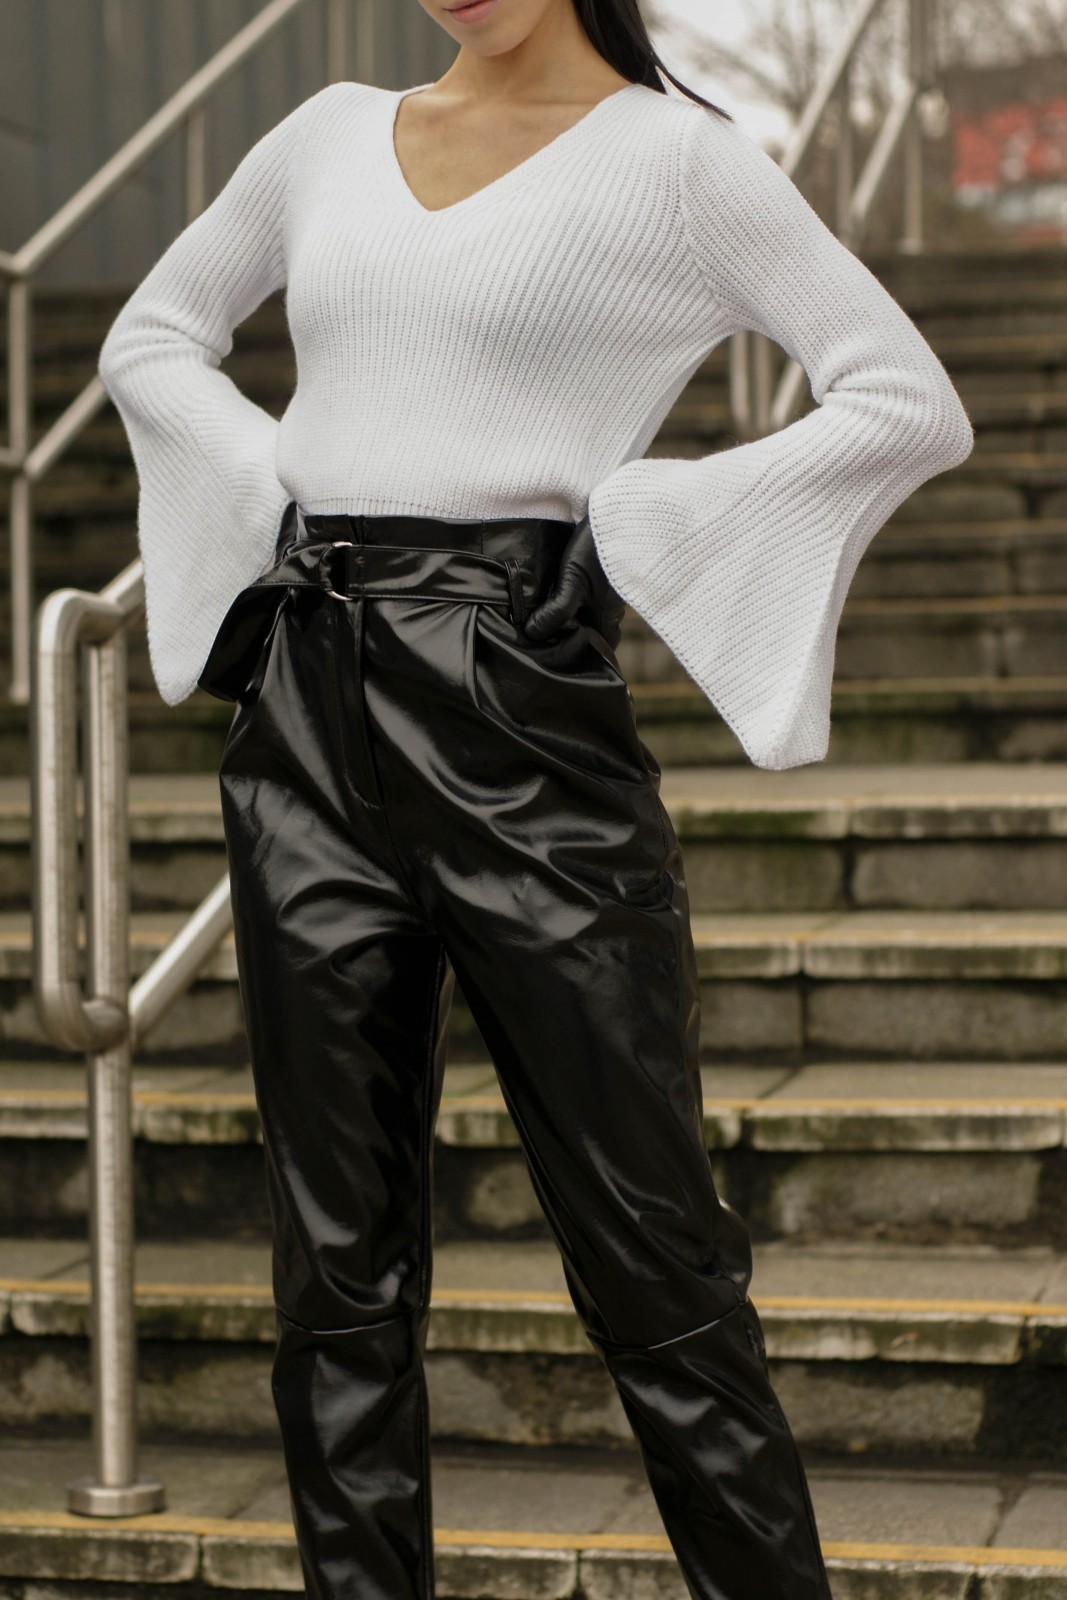 Quick Tips To Successfully Style Vinyl Trousers